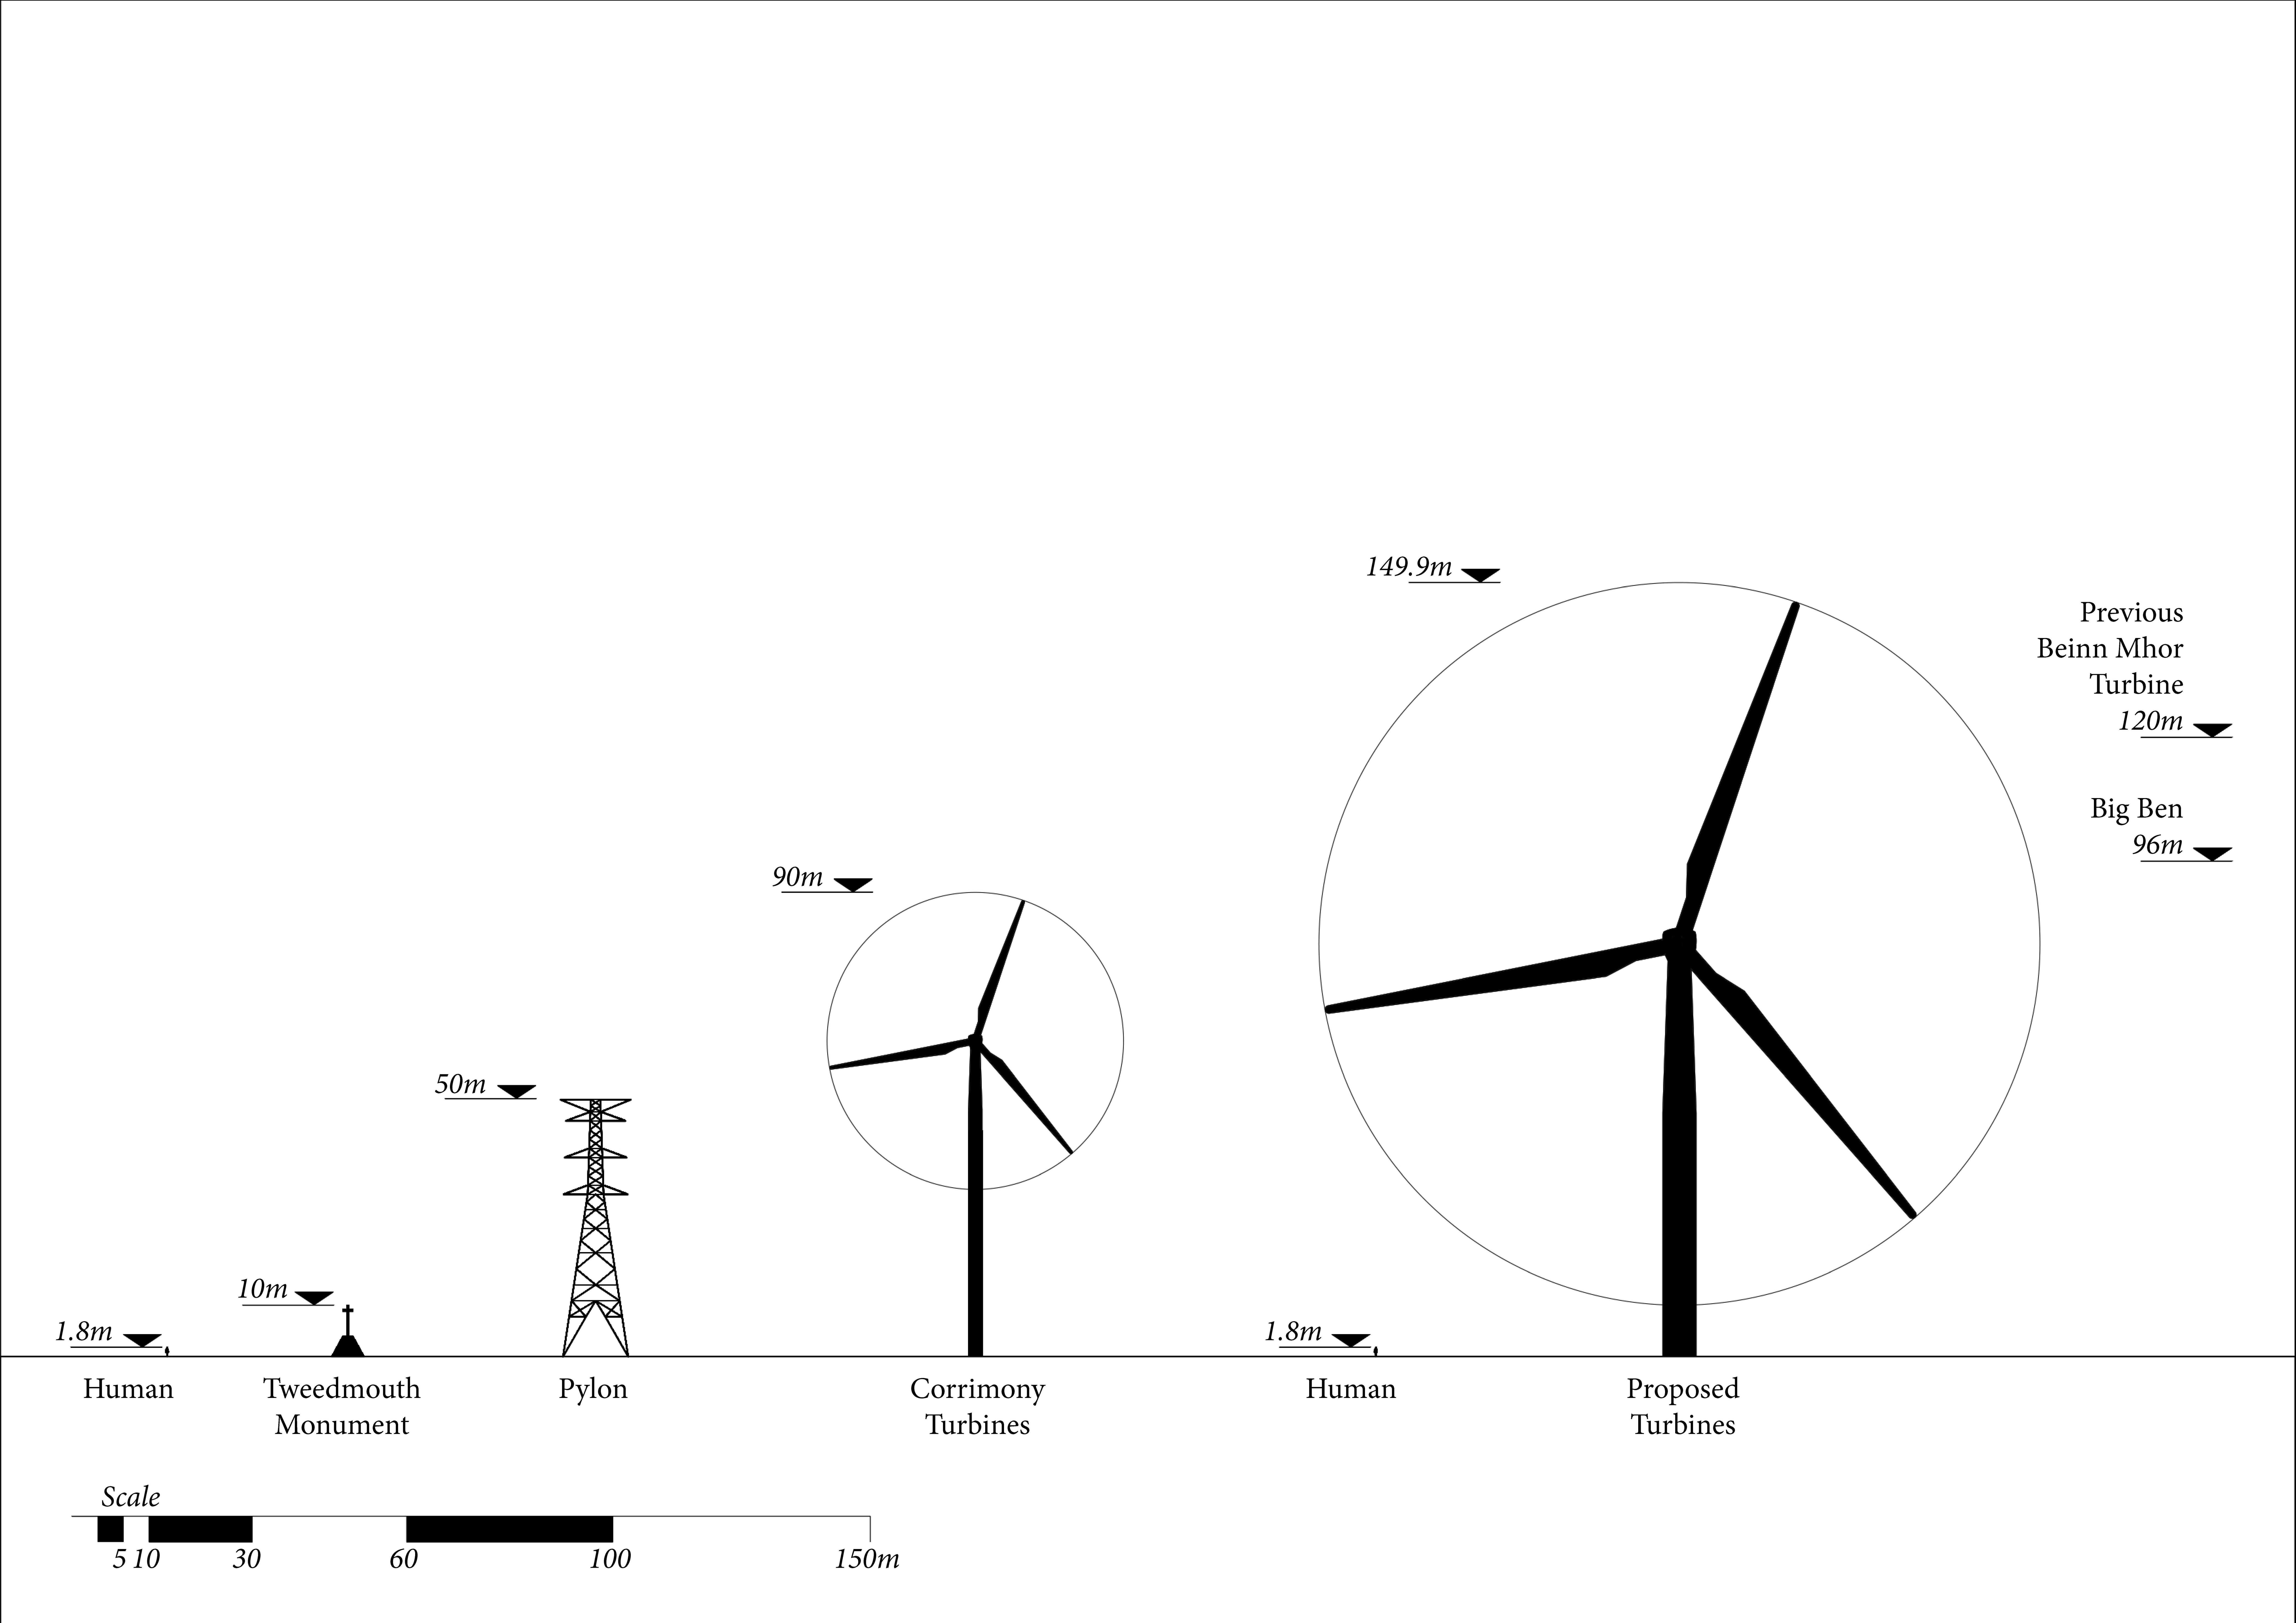 Height comparison with existing structures